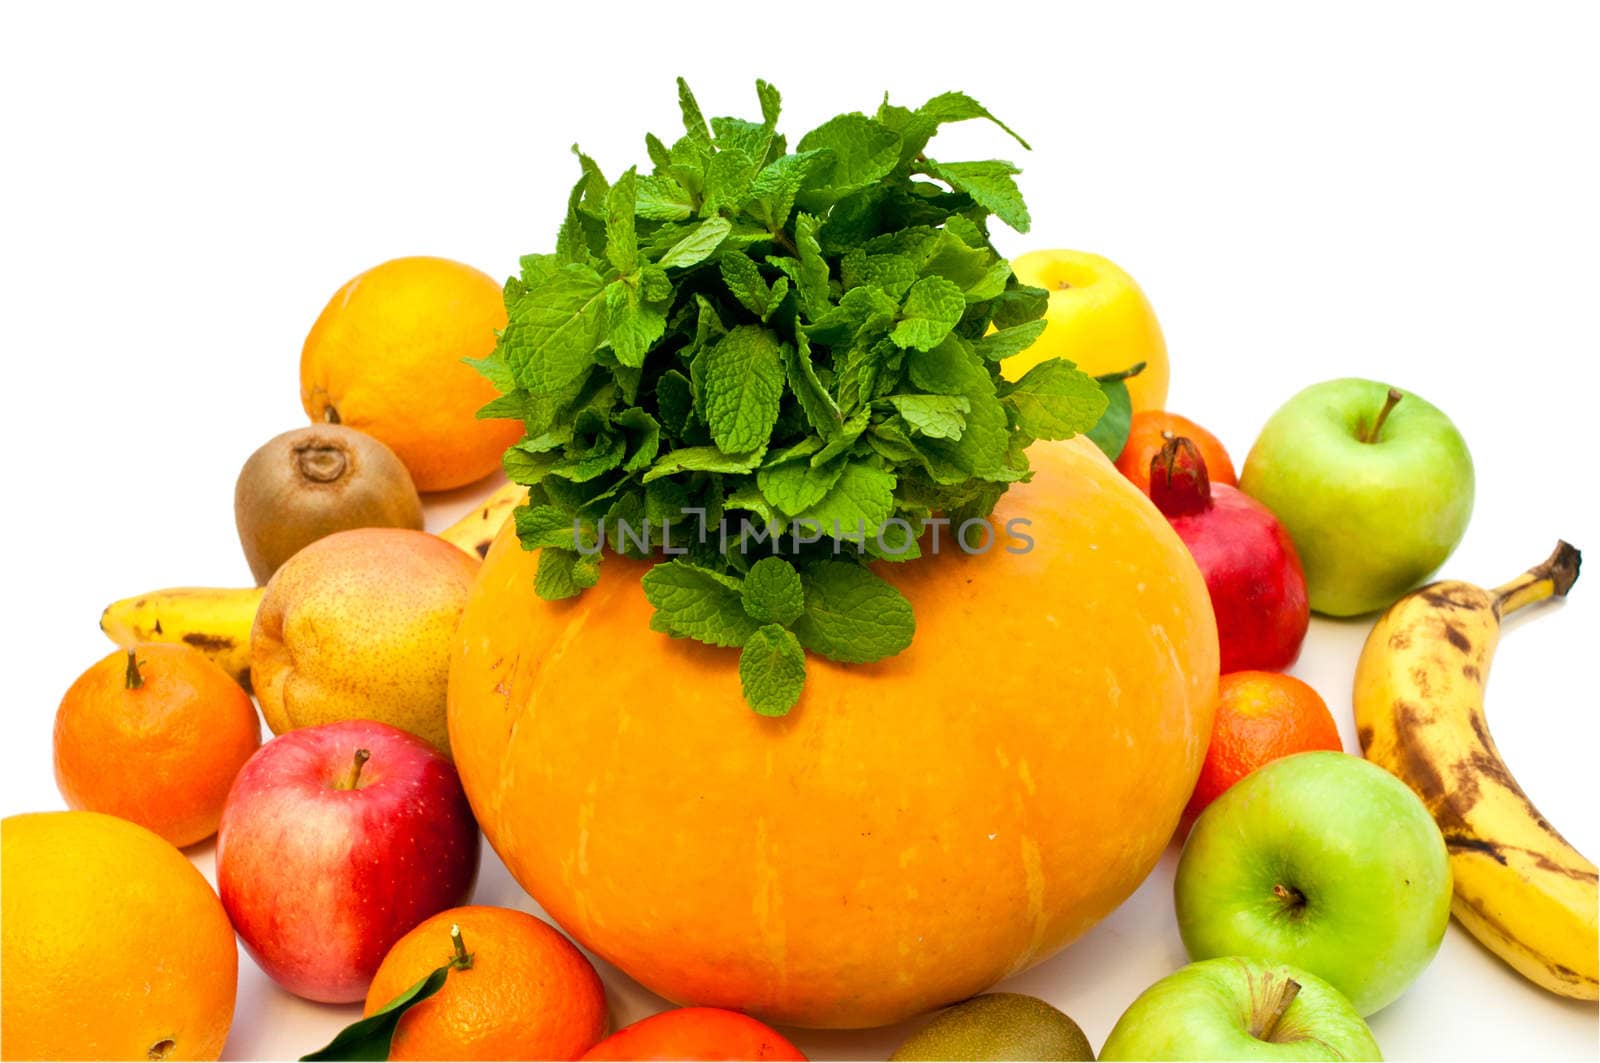 pumpkin and lots of different tropical fruits on a white background by vlaru